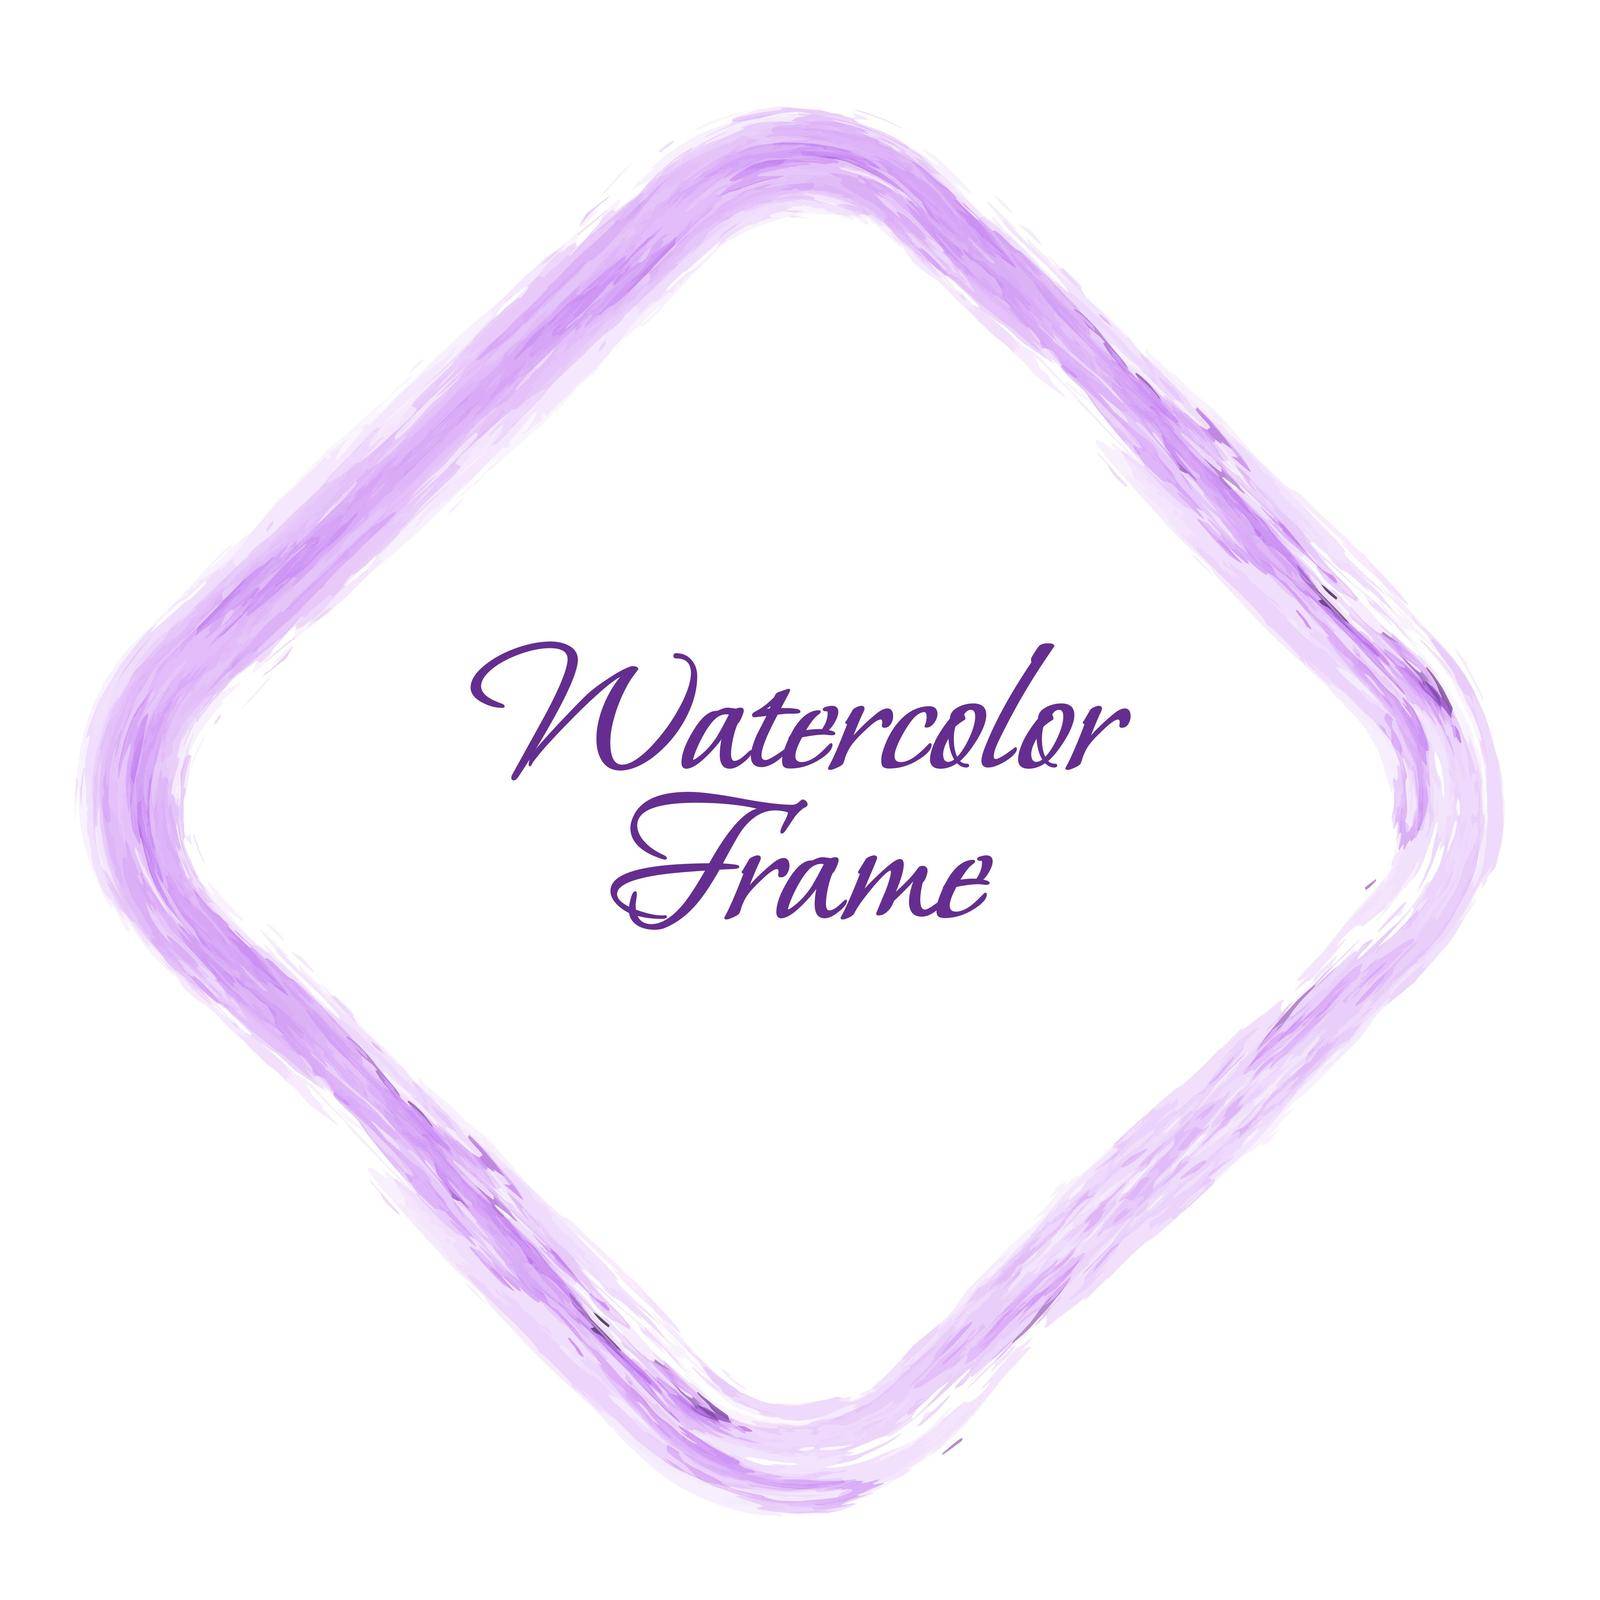 Square purple watercolor frame for postcards, banners, posters and creative design by Grommik